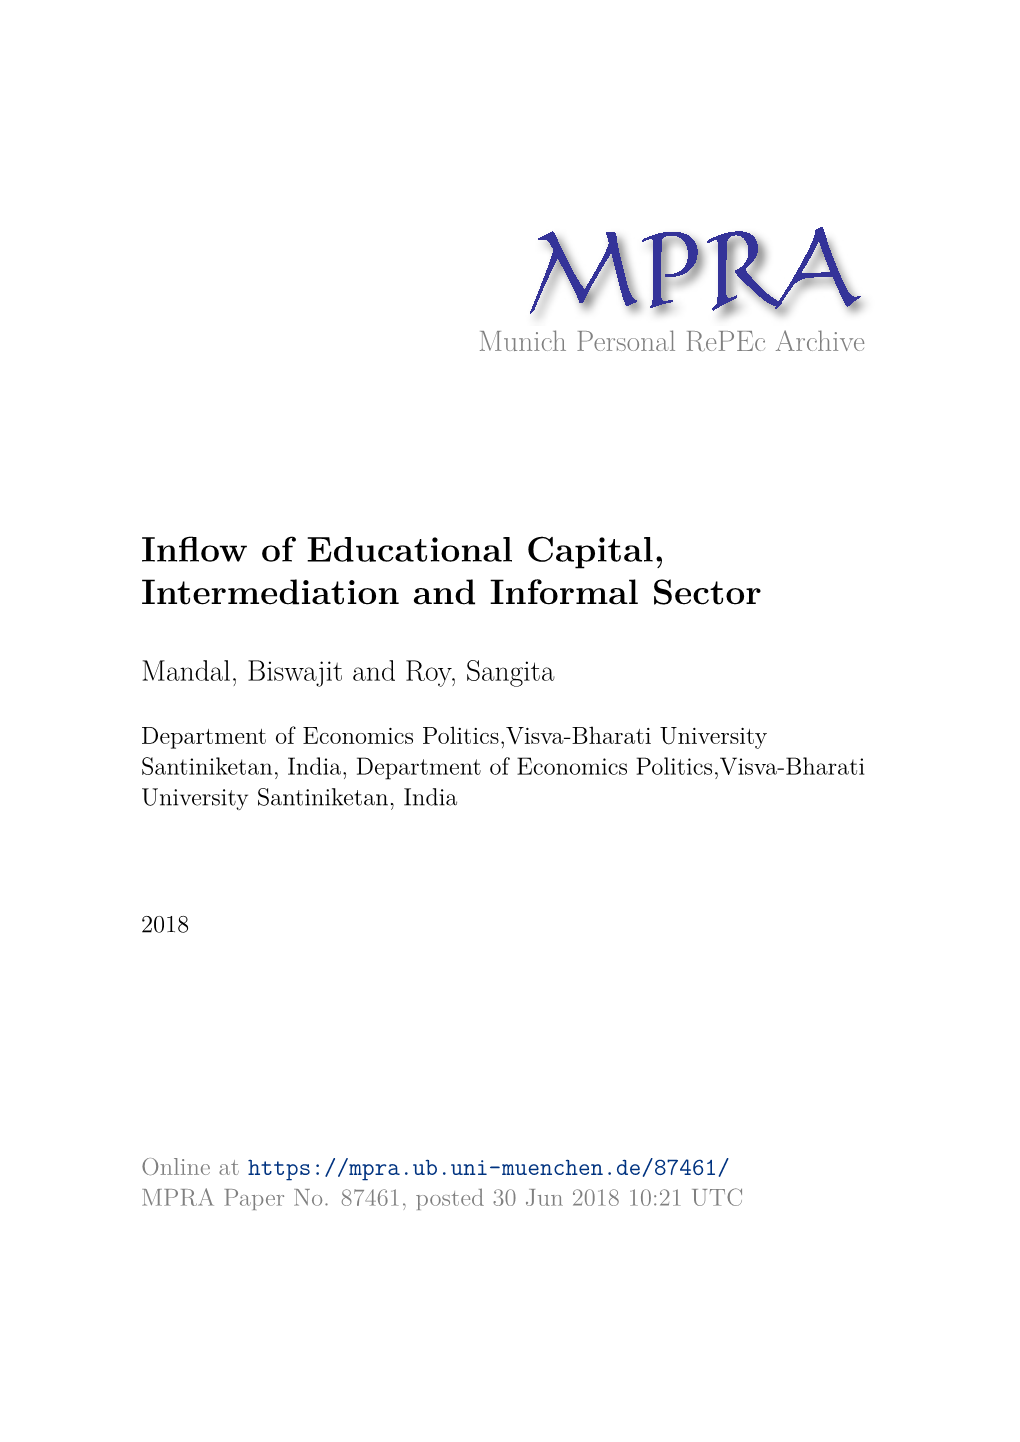 Inflow of Educational Capital, Intermediation and Informal Sector*